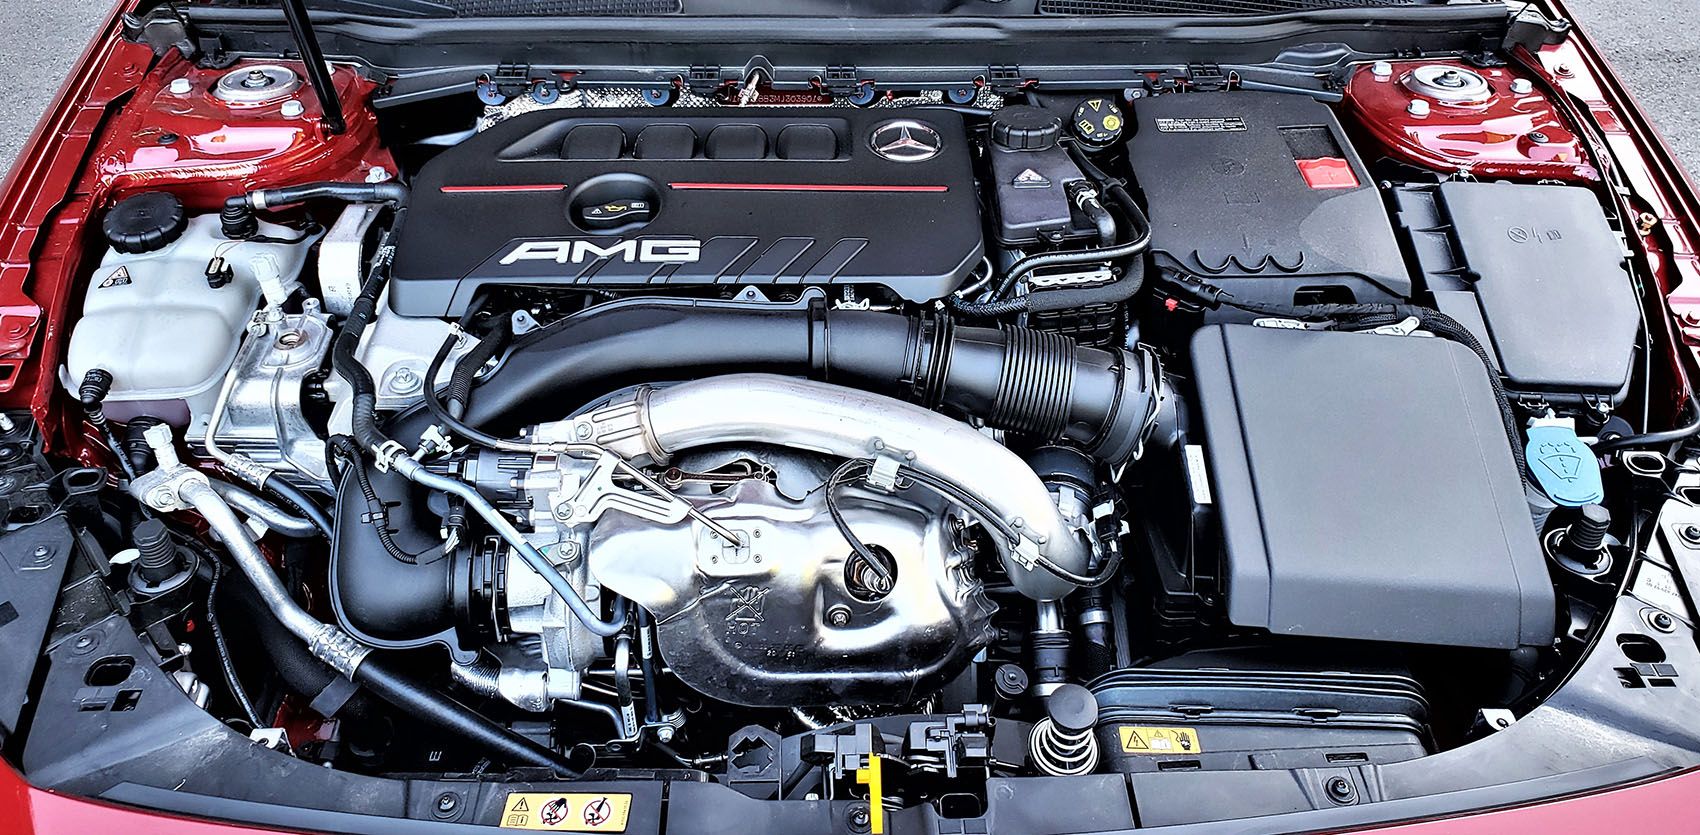 The 2021 Mercedes-AMG A35 4Matic's 2.0-litre turbocharged four-cylinder engine makes 302 hp and 295 lb-ft of torque.